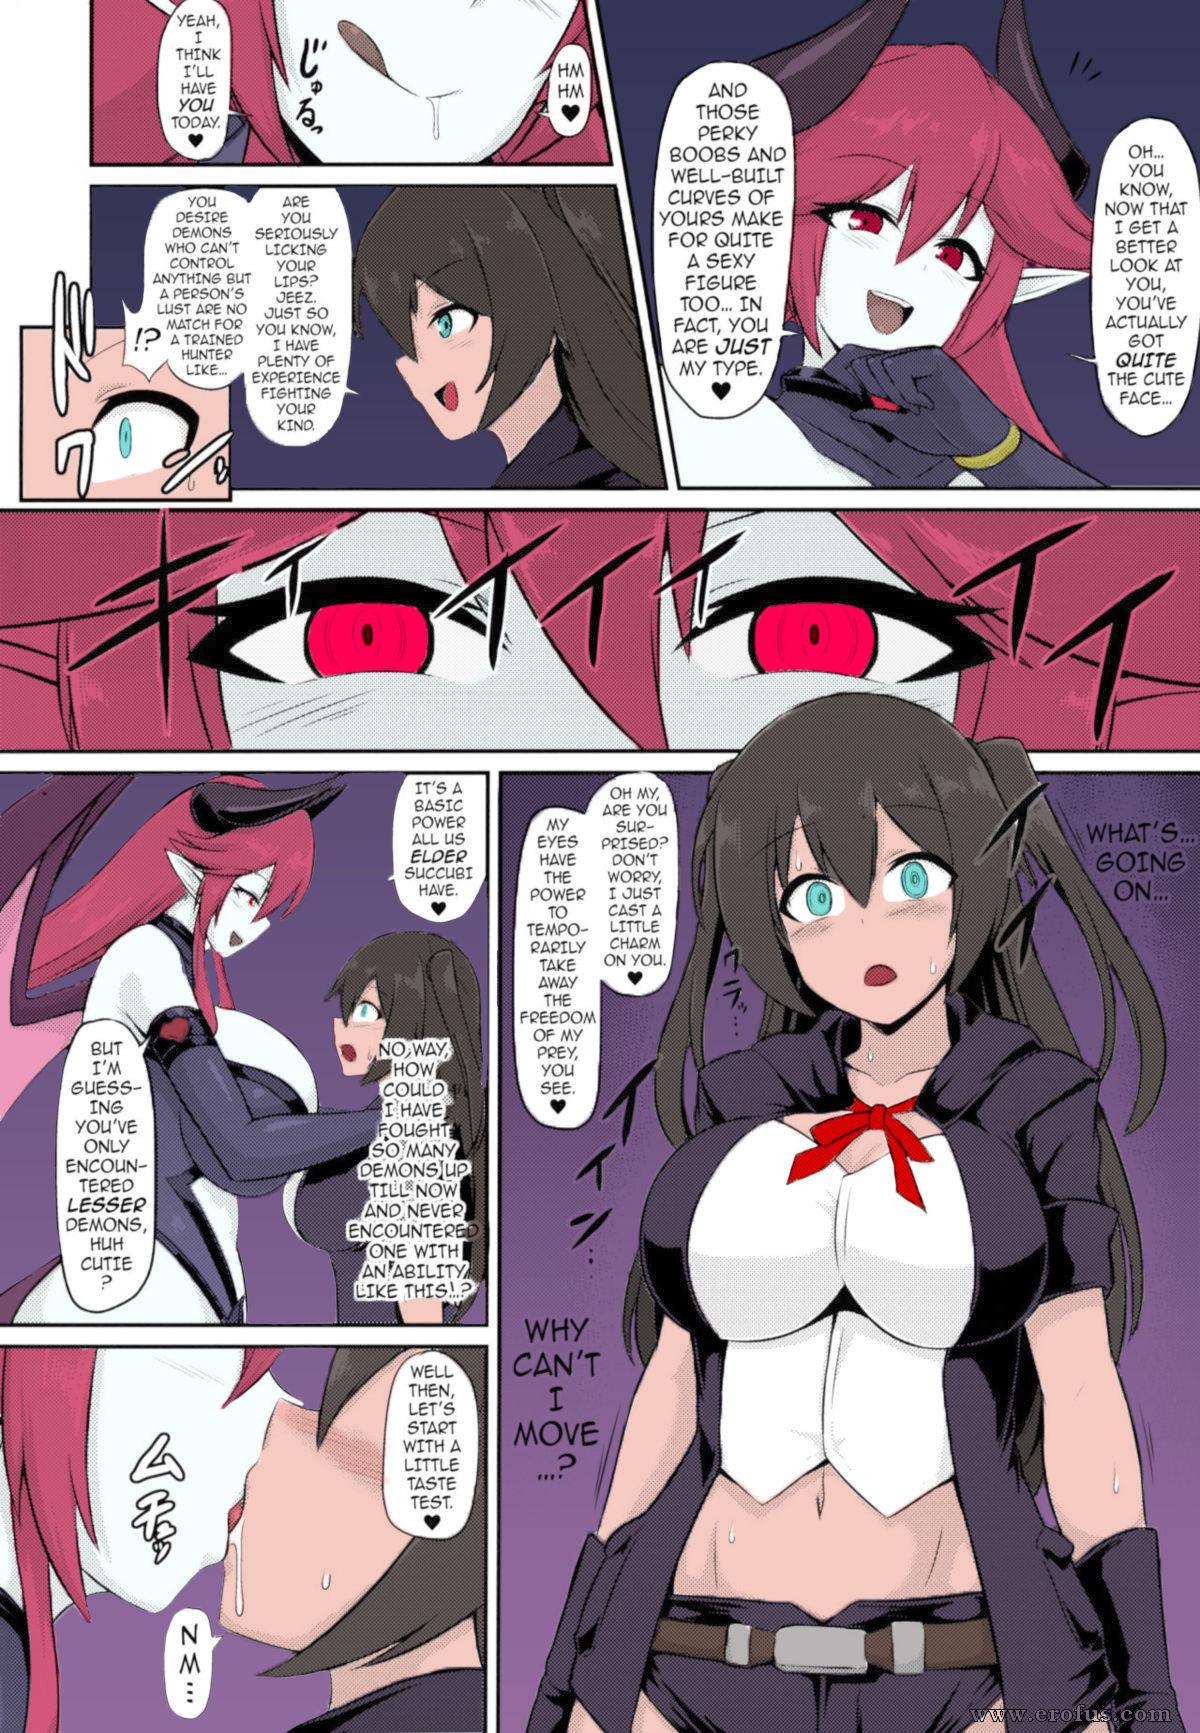 Cock A Lesbian Succubu´s Lust Crest Pleasure Training - COLOR- Ongoing Sharing - Page 3